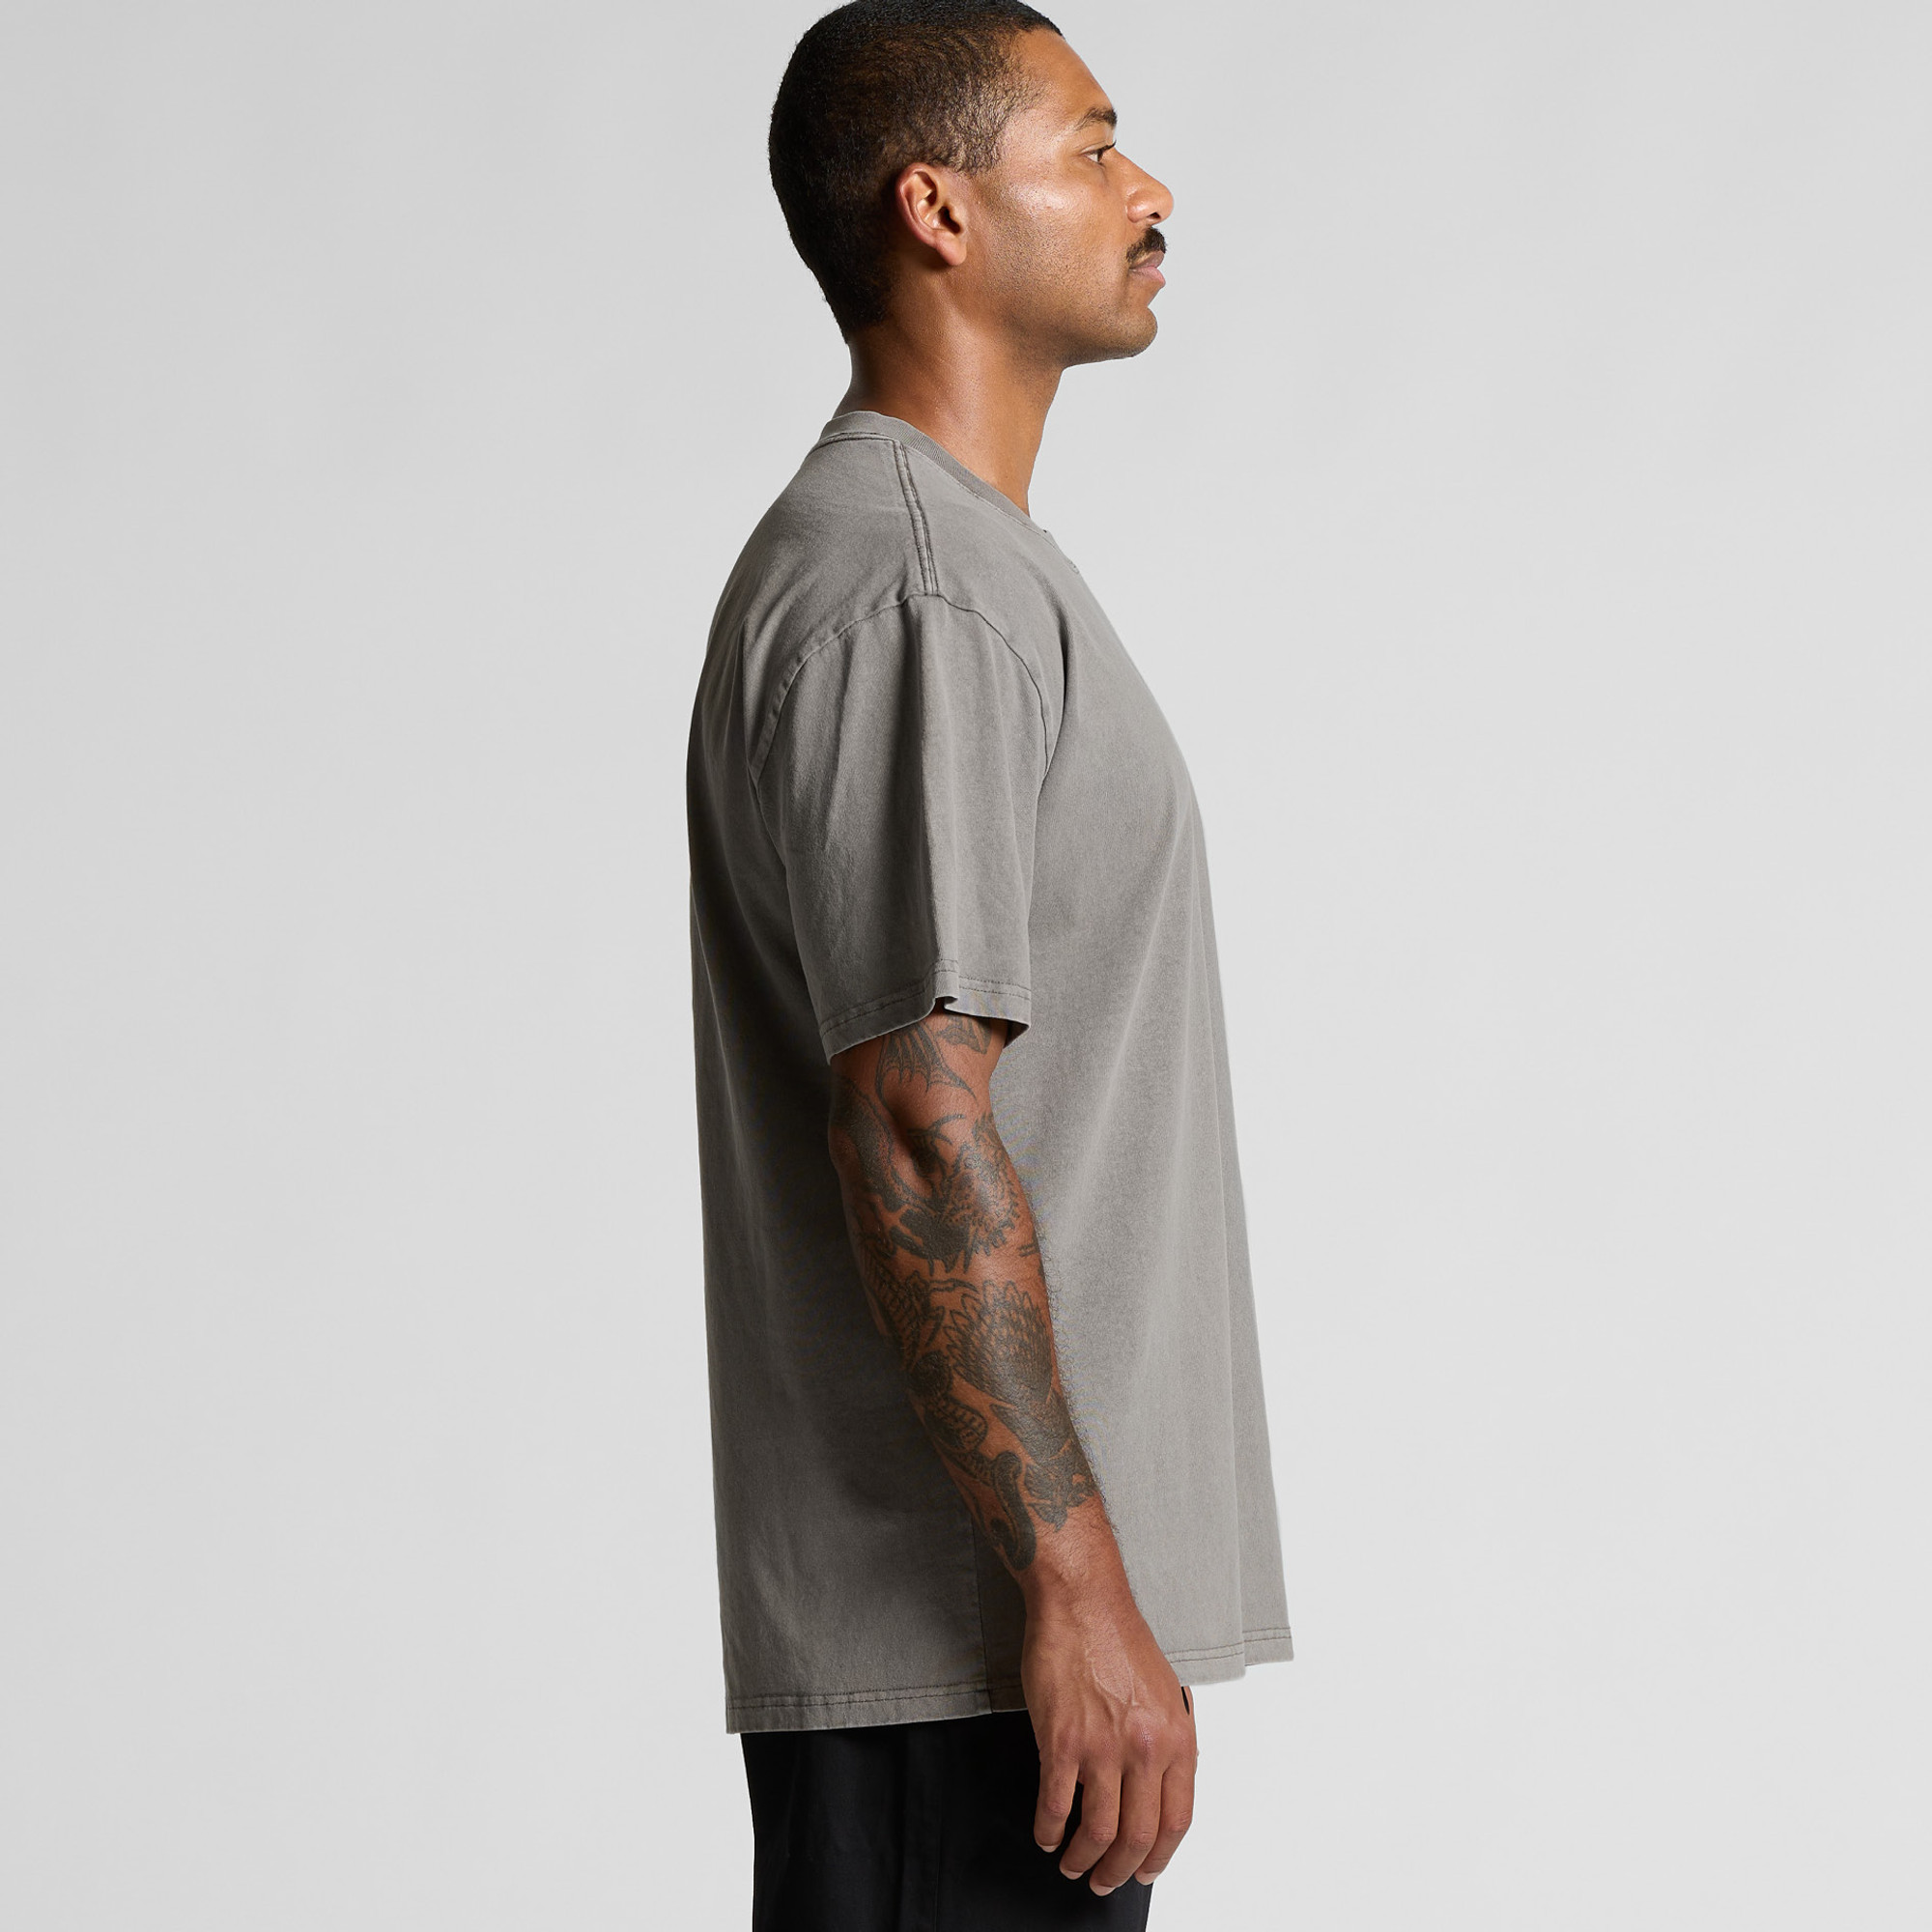 AS Colour MENS HEAVY FADED L/S TEE